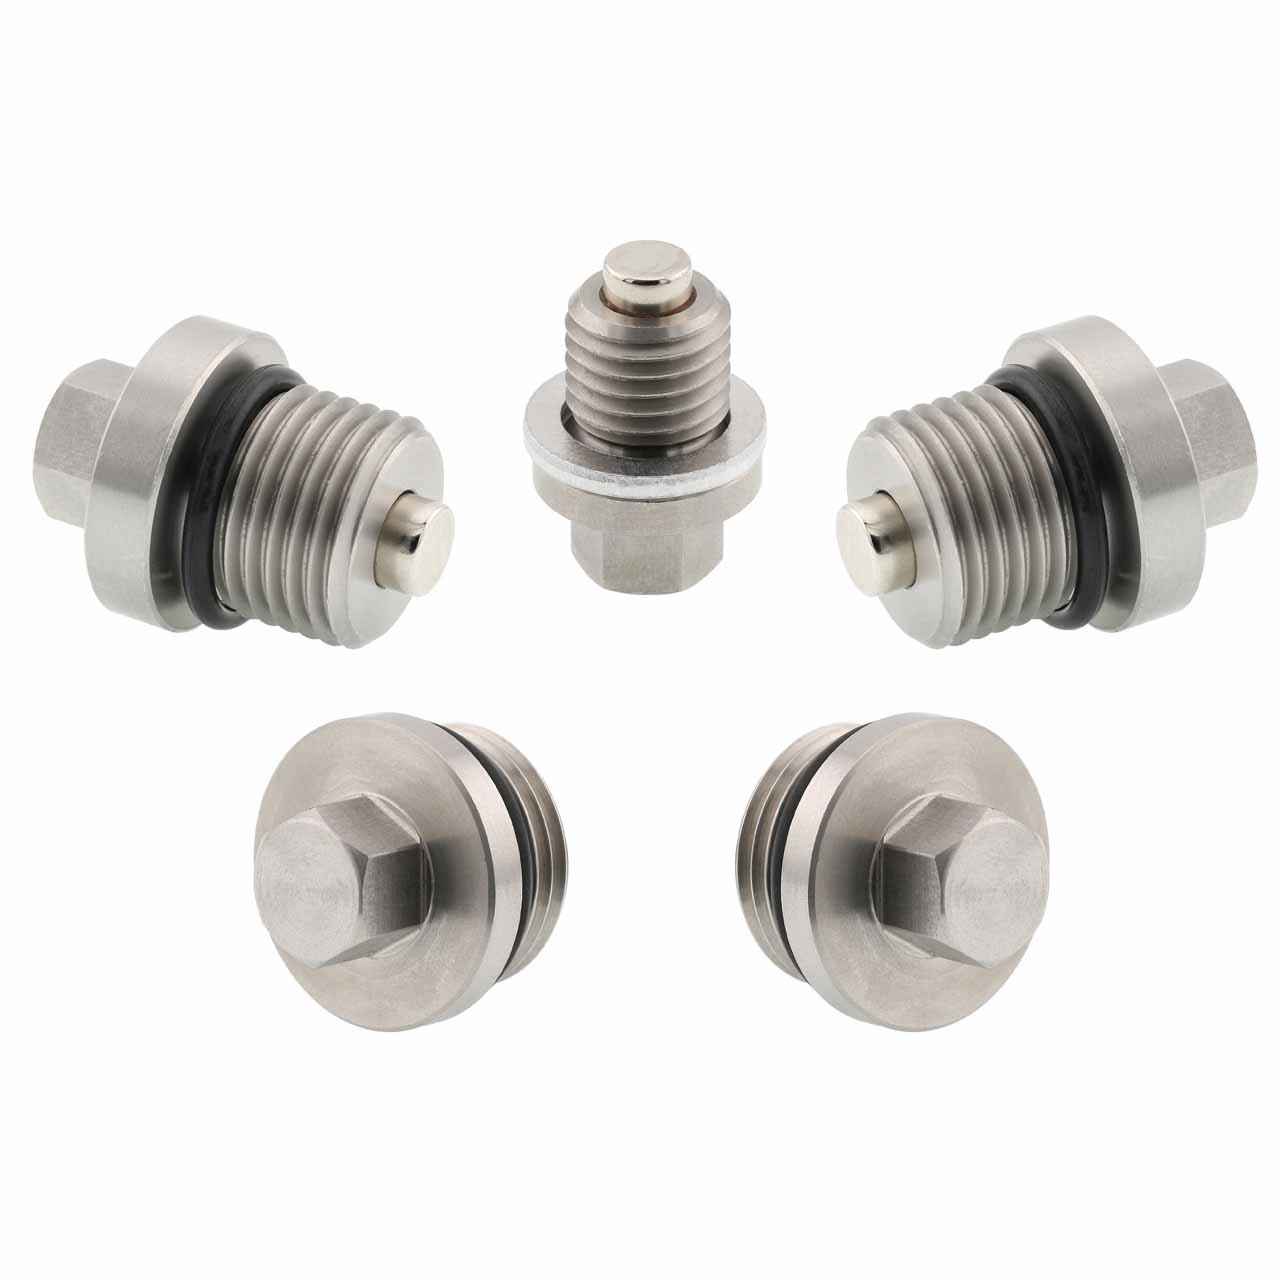 Polaris RZR XP 1000 Ultimate Magnetic Oil Drain Plug Kit - 2023 - Engine, Transmission, Differential - Made In USA